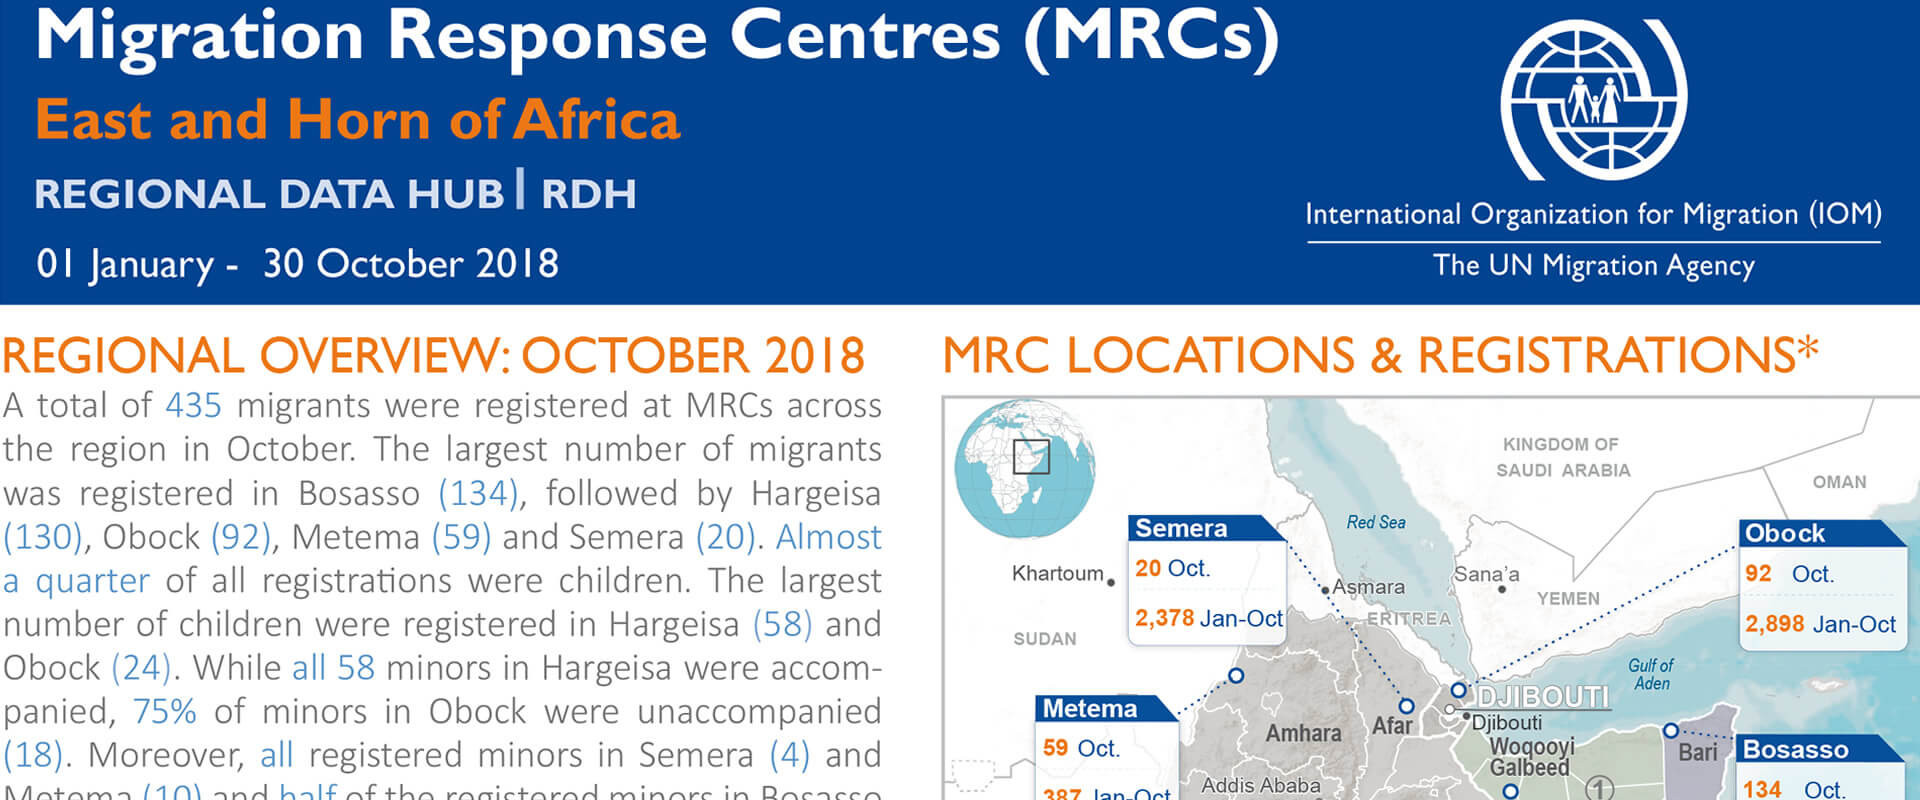 Migration Response Centres (MRCs) East and Horn of Africa (01 January - 31 October 2018)